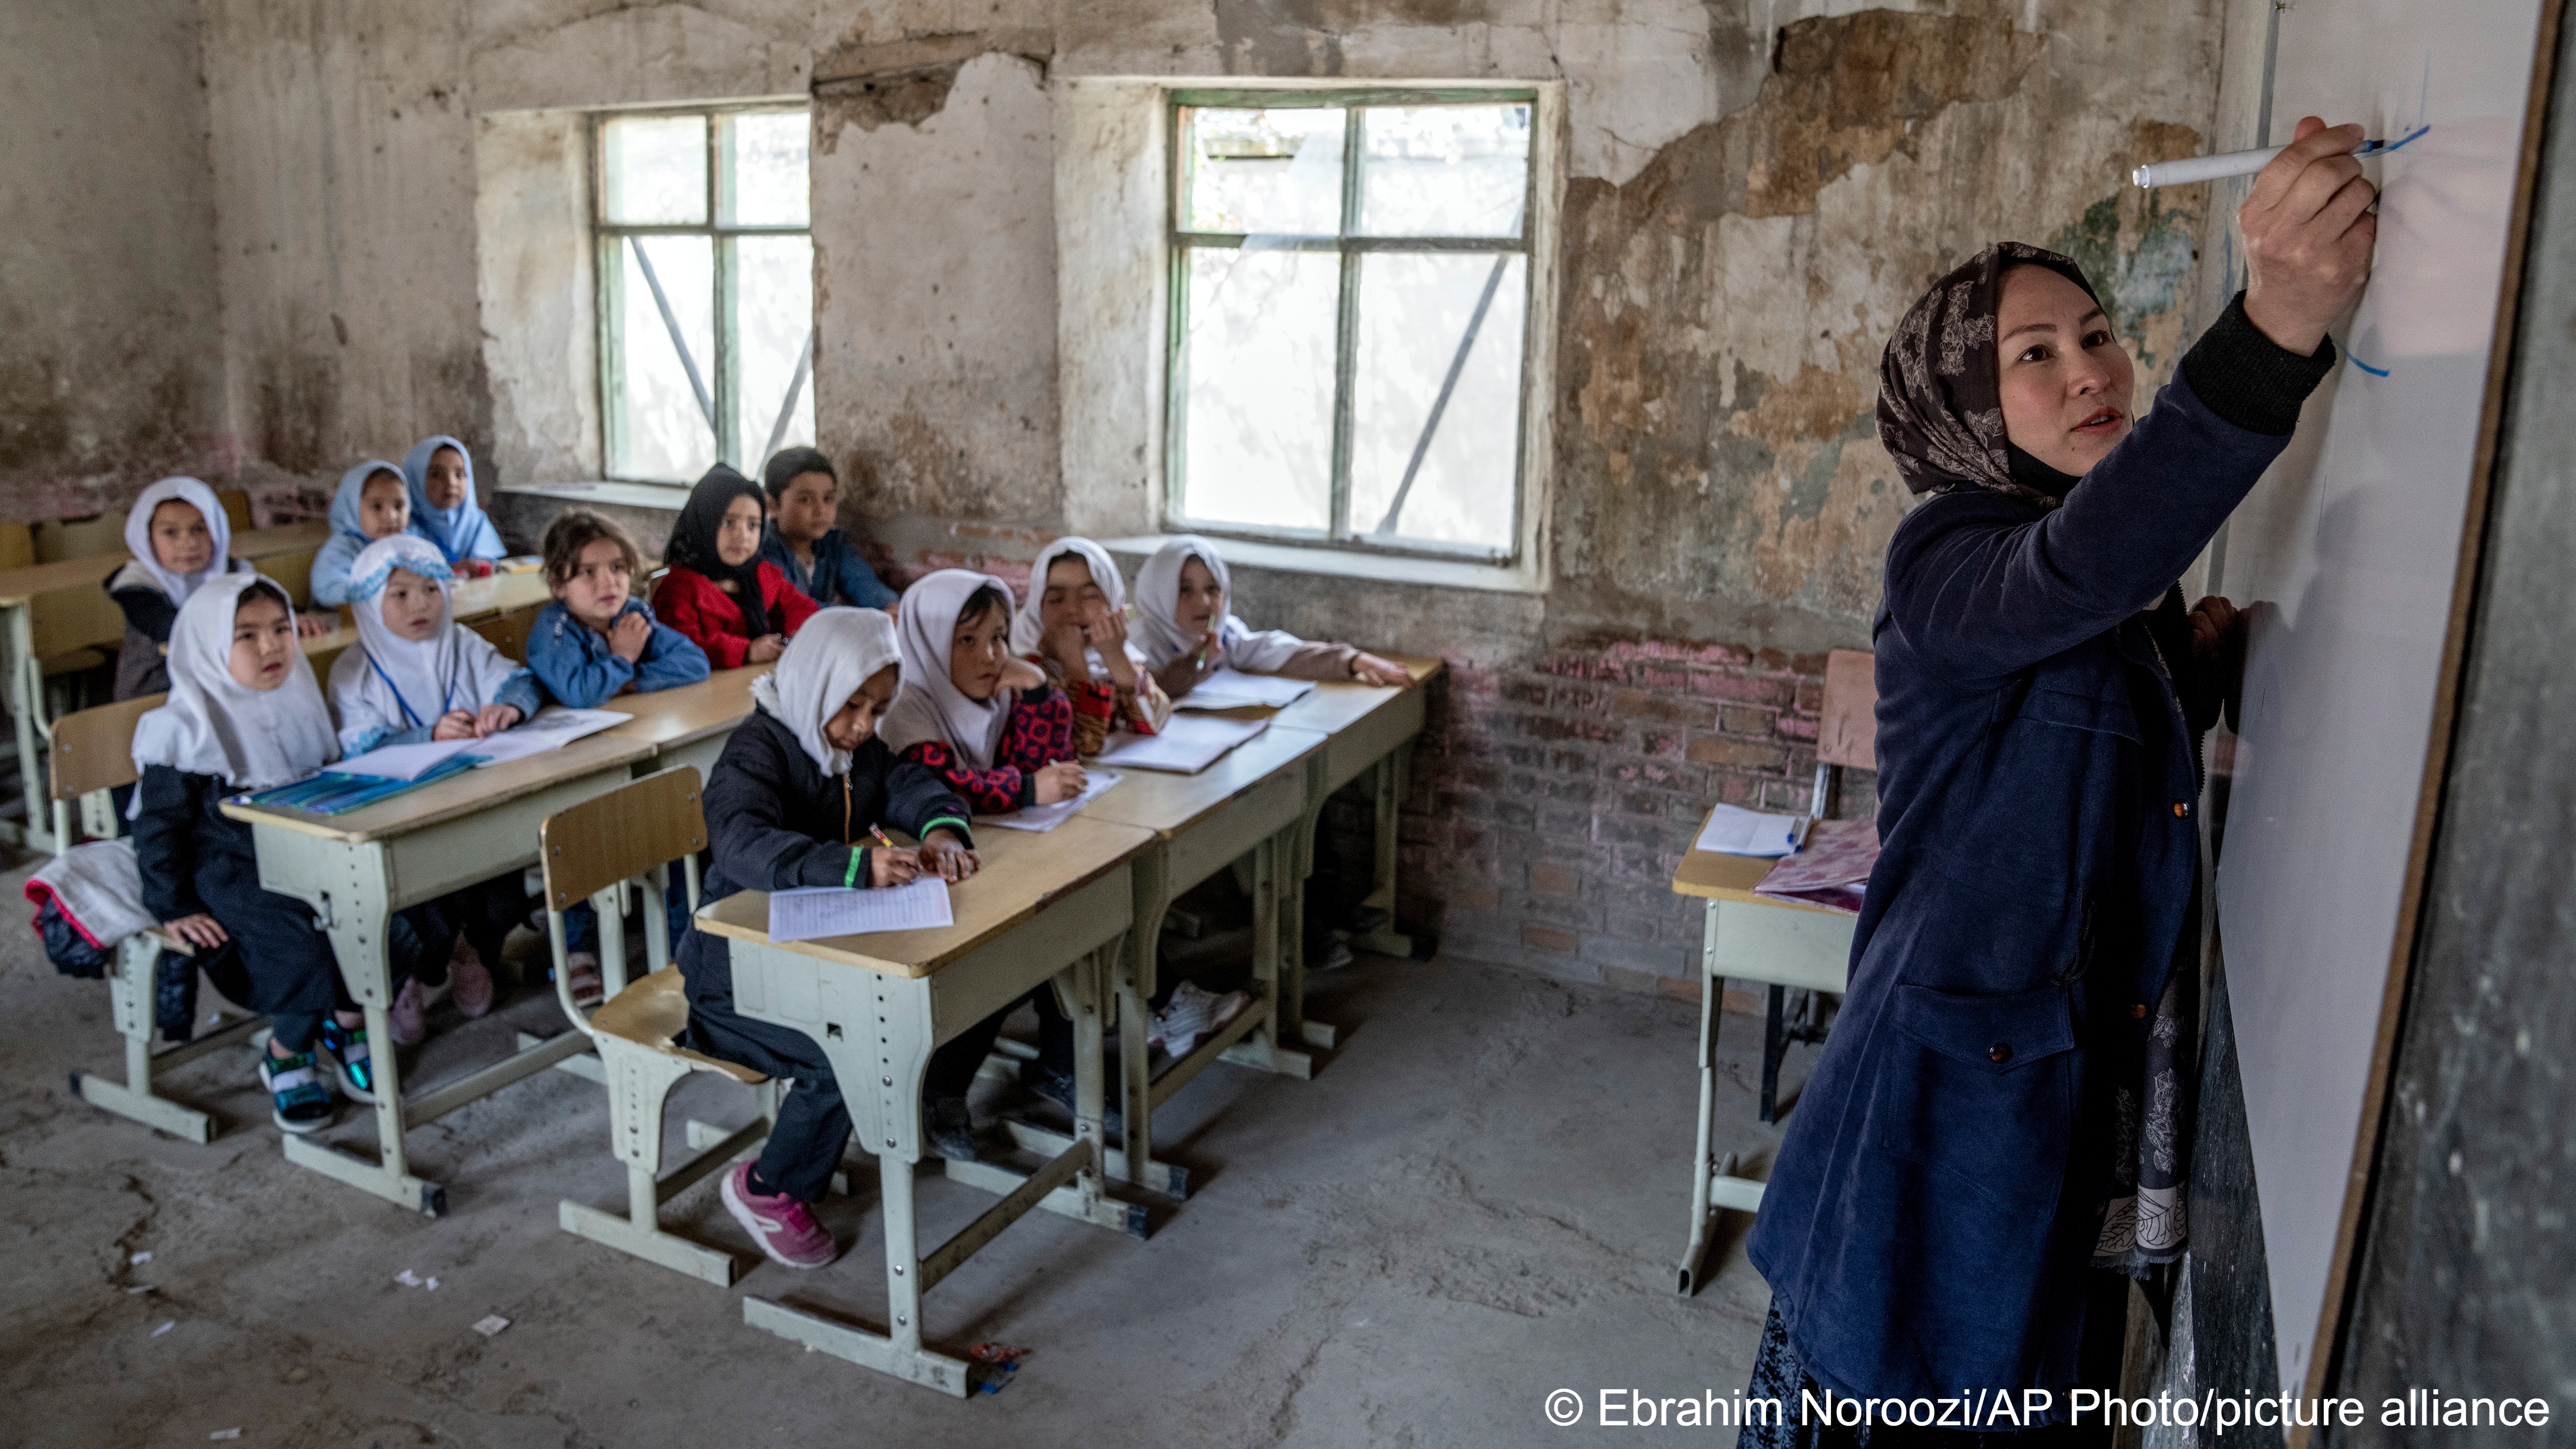 A female teacher writes on a white board while watched by a class of girls in headscarves on the first day of the school year, Kabul, Afghanistan, 25 March 2023